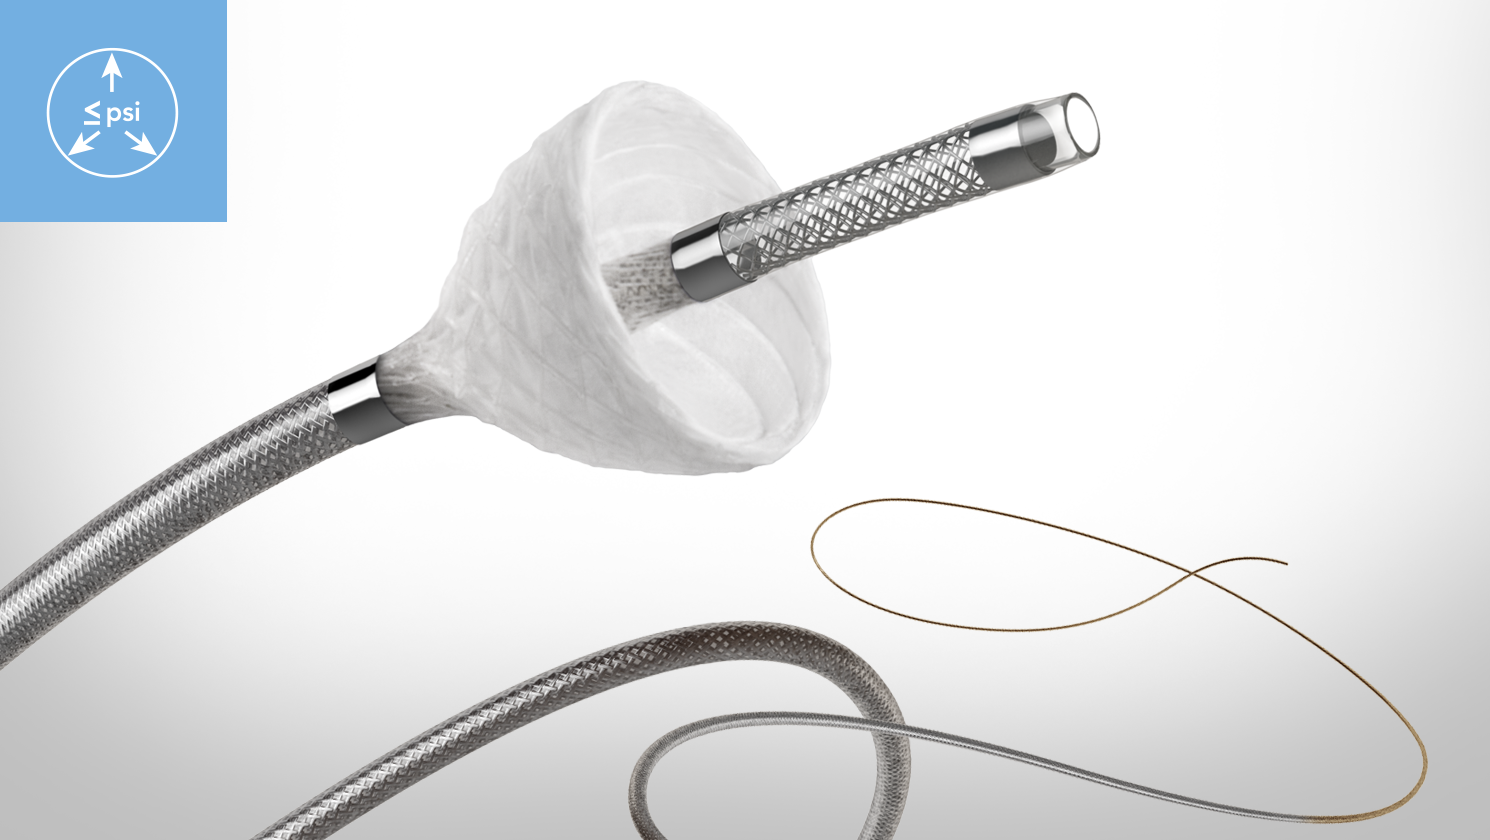 Surefire Medical Launches New Precision Infusion System